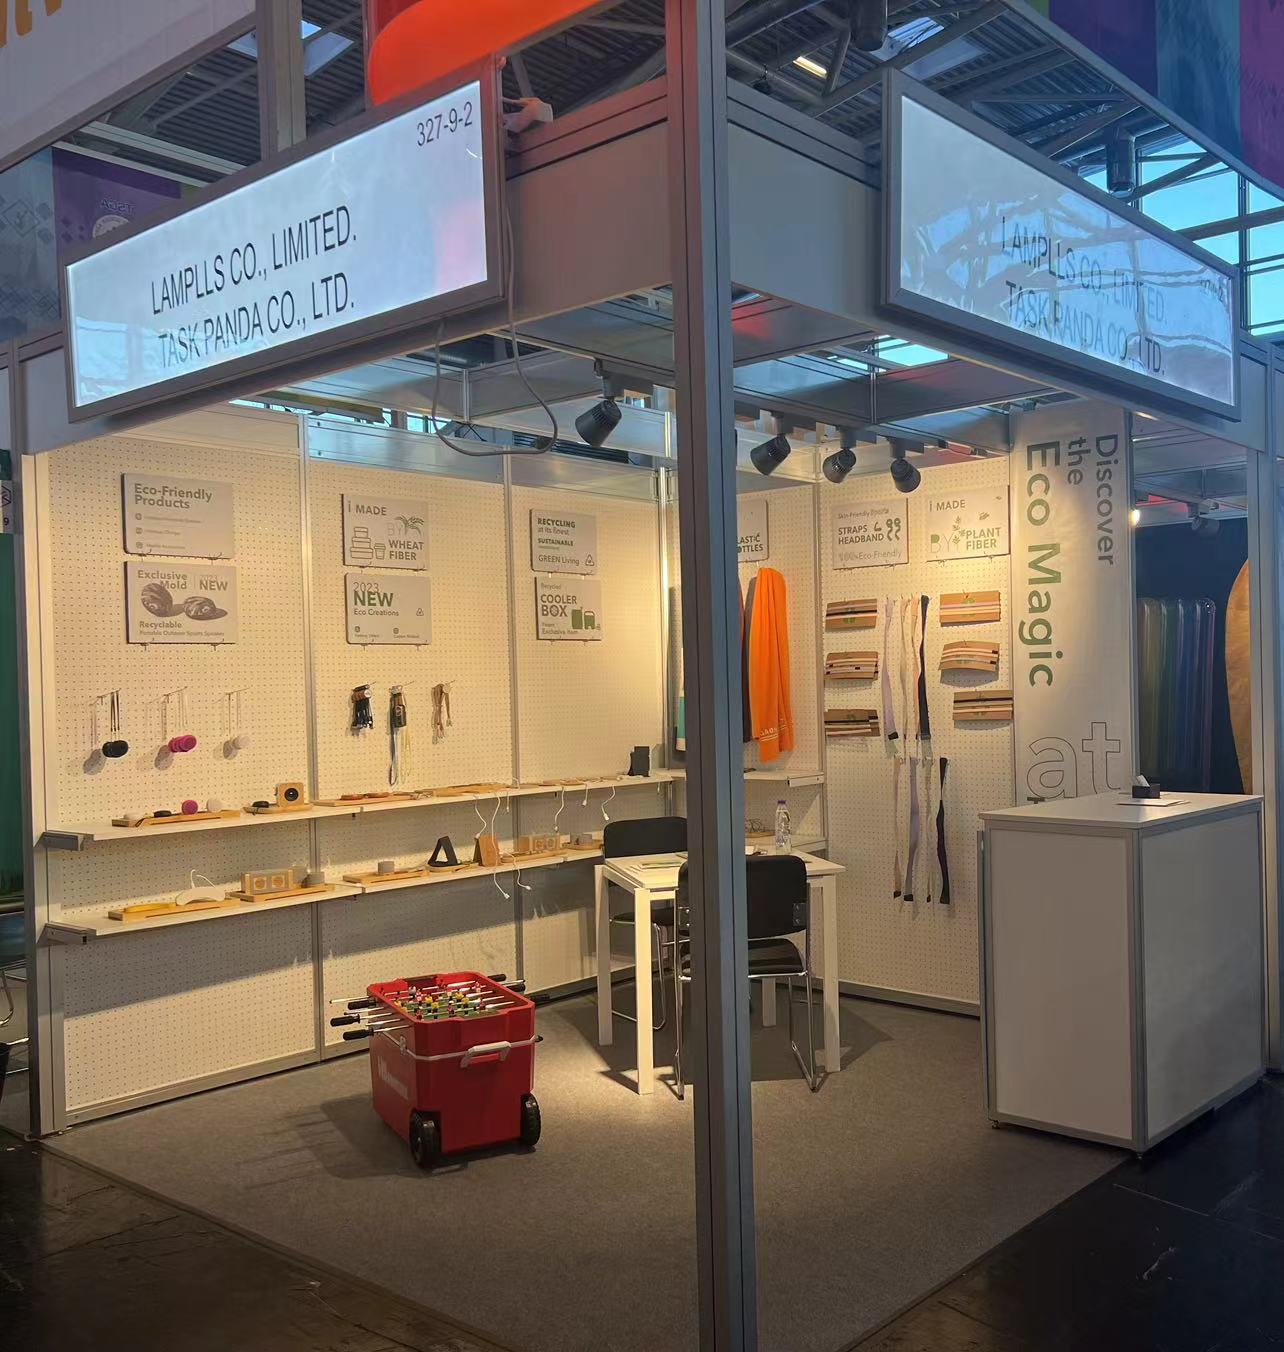 Task Panda showcased its products at the ISPO 2023 show in Munich